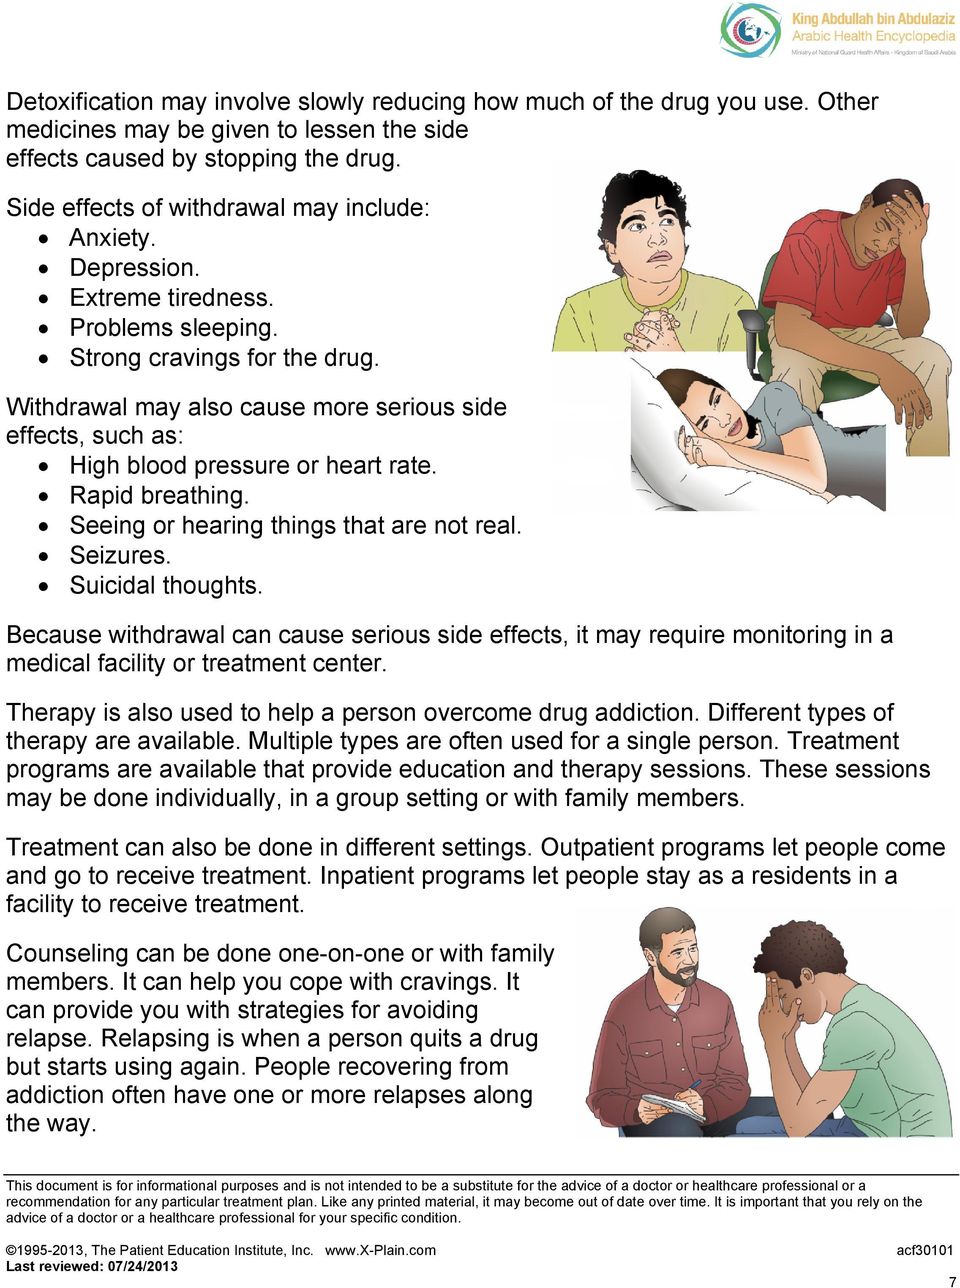 Withdrawal may also cause more serious side effects, such as: High blood pressure or heart rate. Rapid breathing. Seeing or hearing things that are not real. Seizures. Suicidal thoughts.